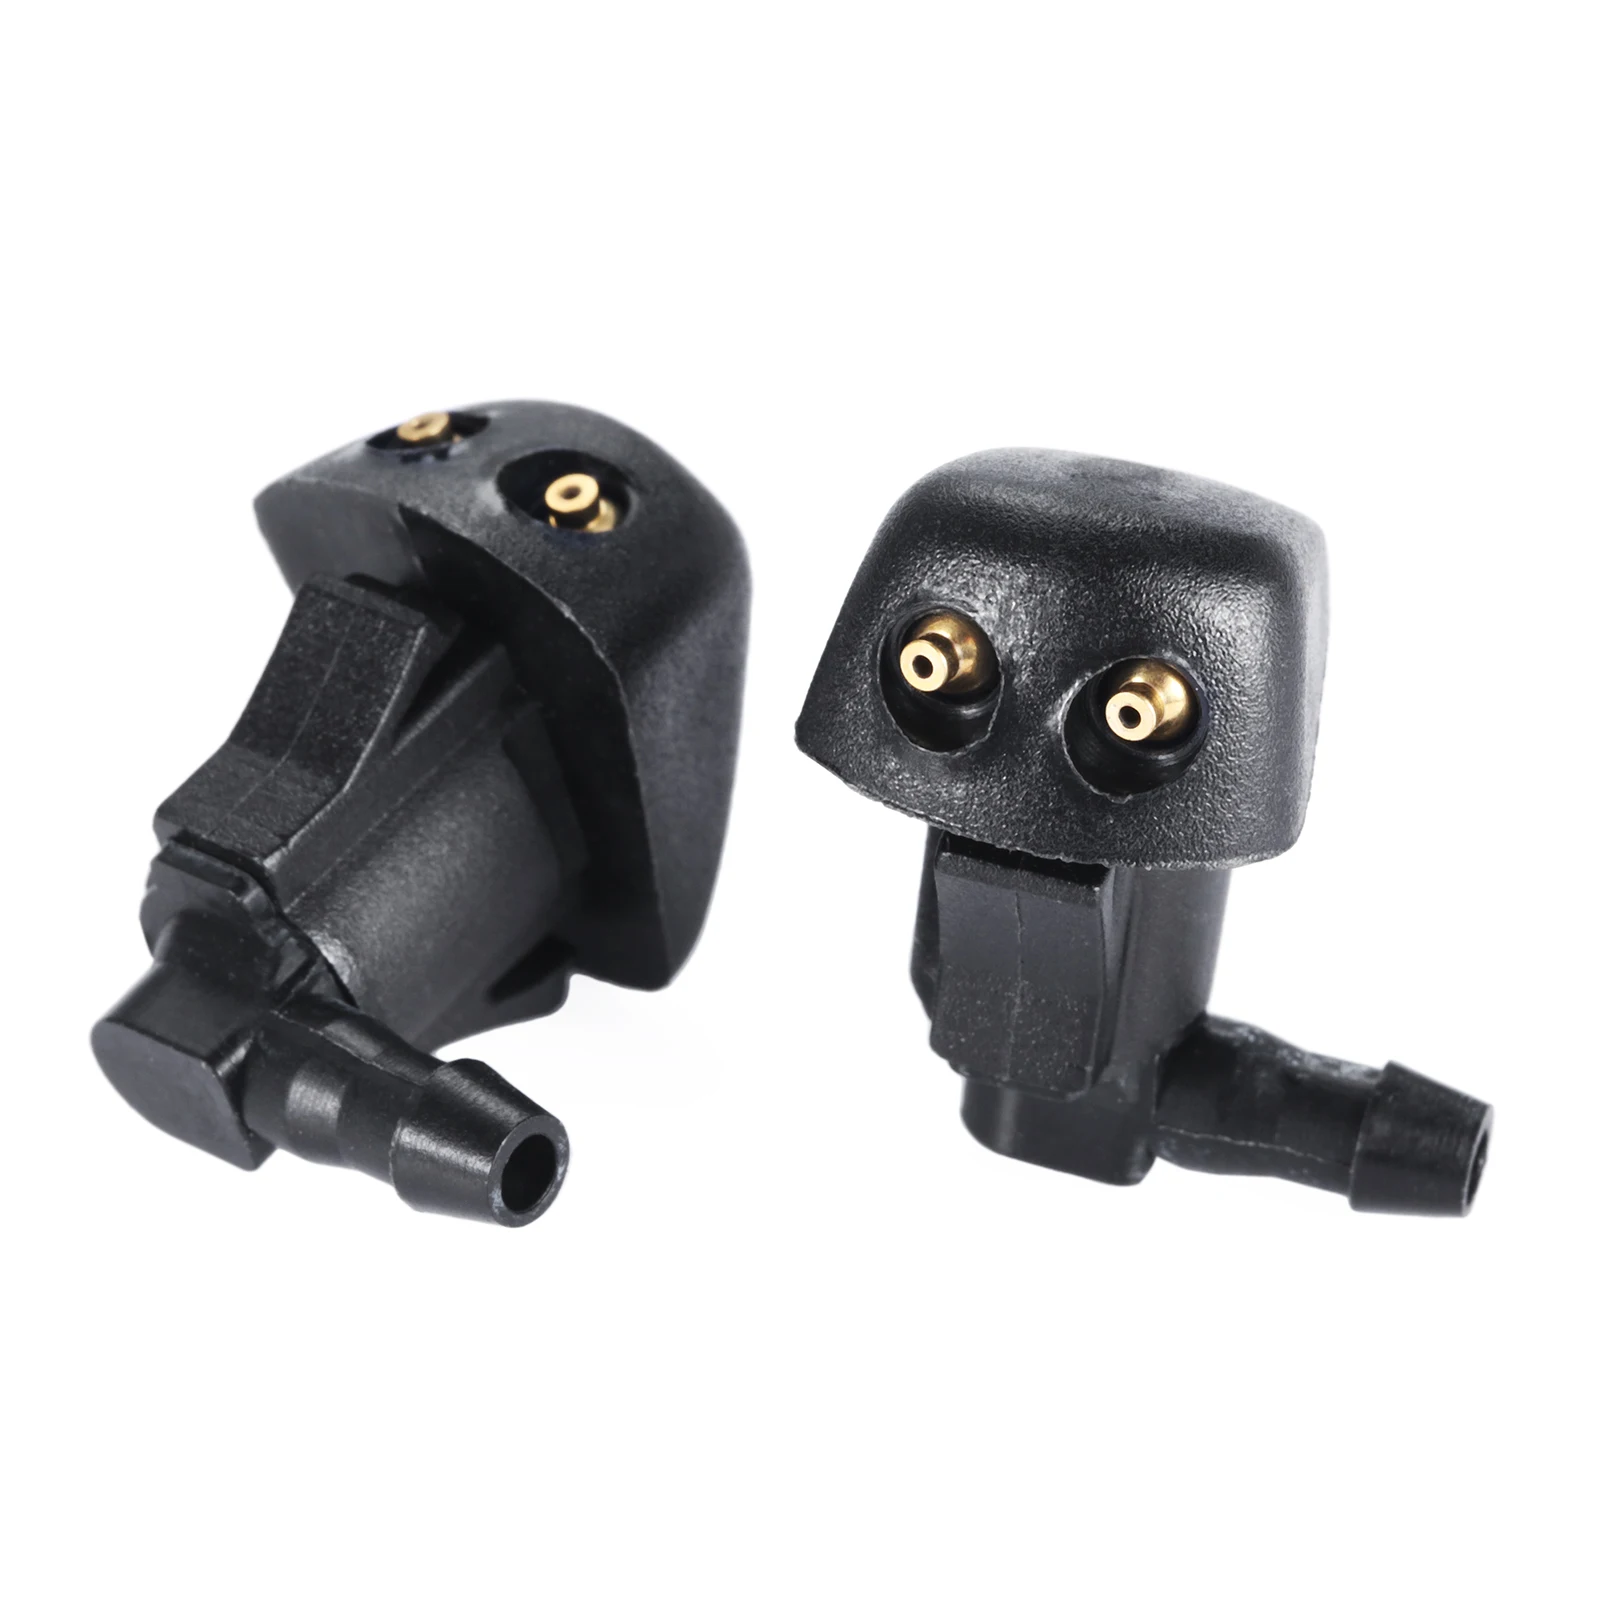 2Pcs Front Windshield Wiper Washer Jet Fluid Nozzle for Mazda 3 MK1 2003-09 5 - £10.71 GBP